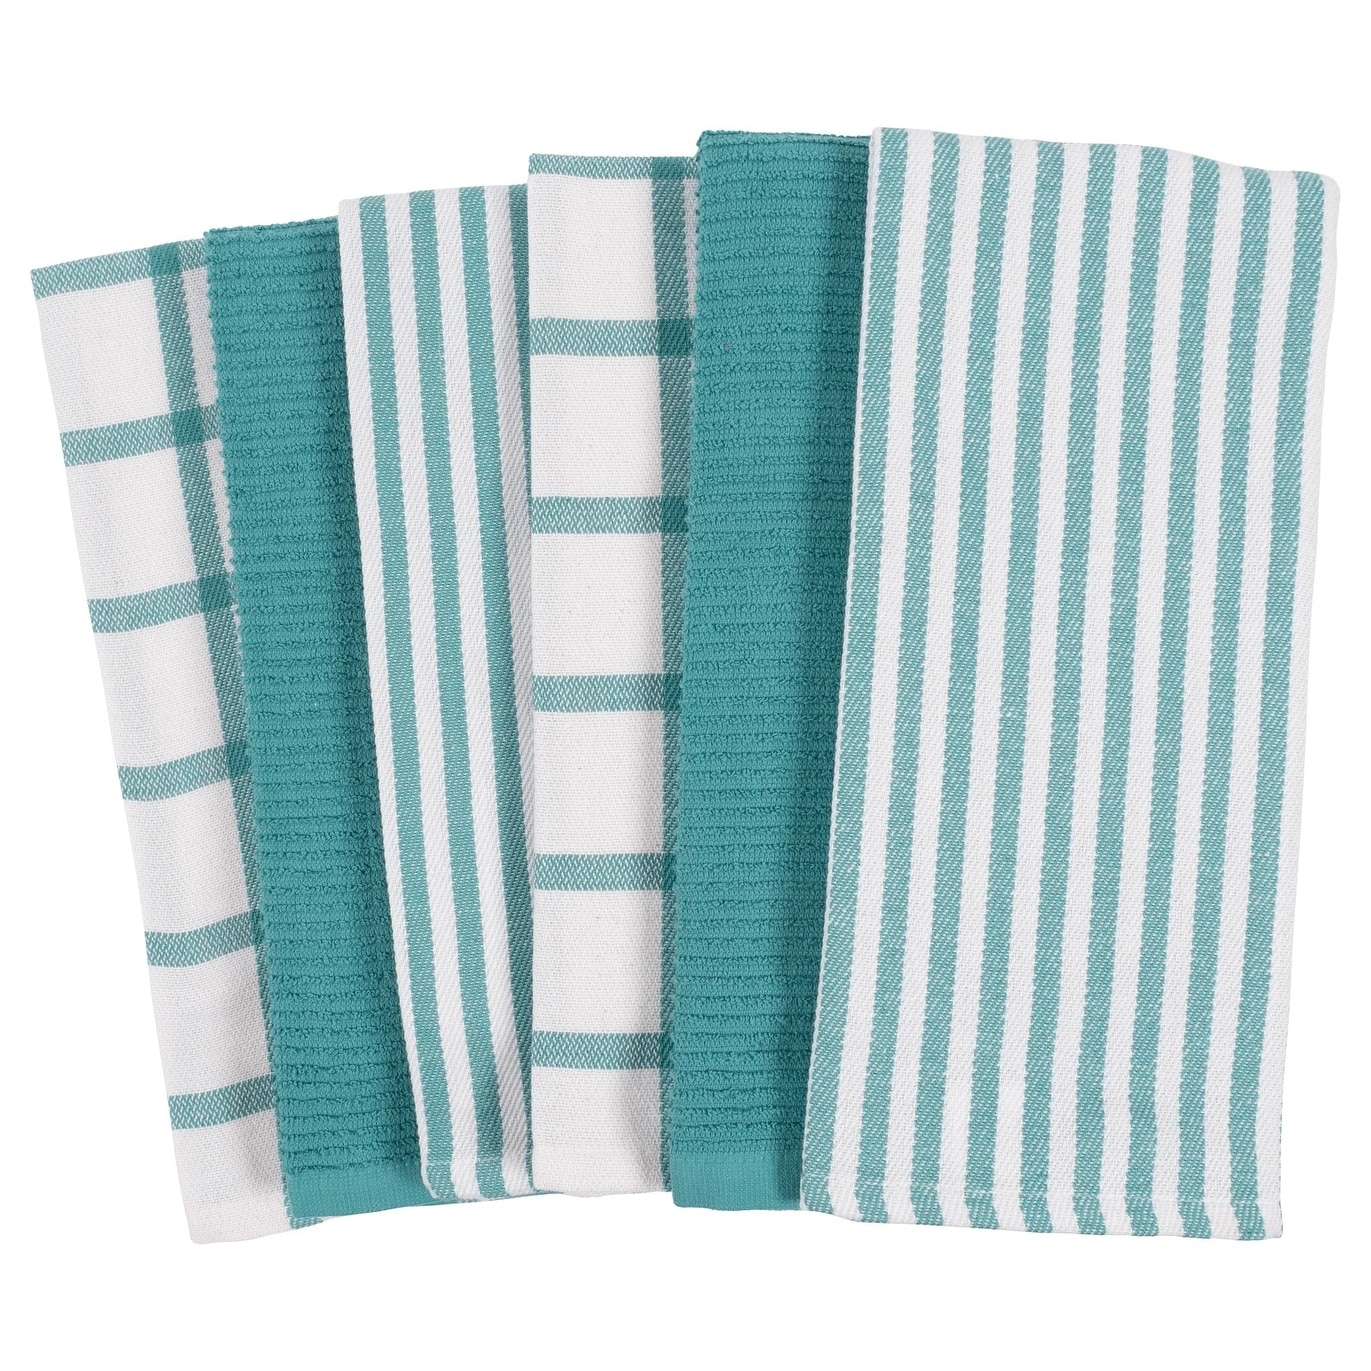 https://ak1.ostkcdn.com/images/products/is/images/direct/2c6c7f1fcd456a278e0d0f8b0bb77b4a7ebf73cf/Mixed-Flat-%26-Terry-Kitchen-Towels%2C-Set-of-6.jpg